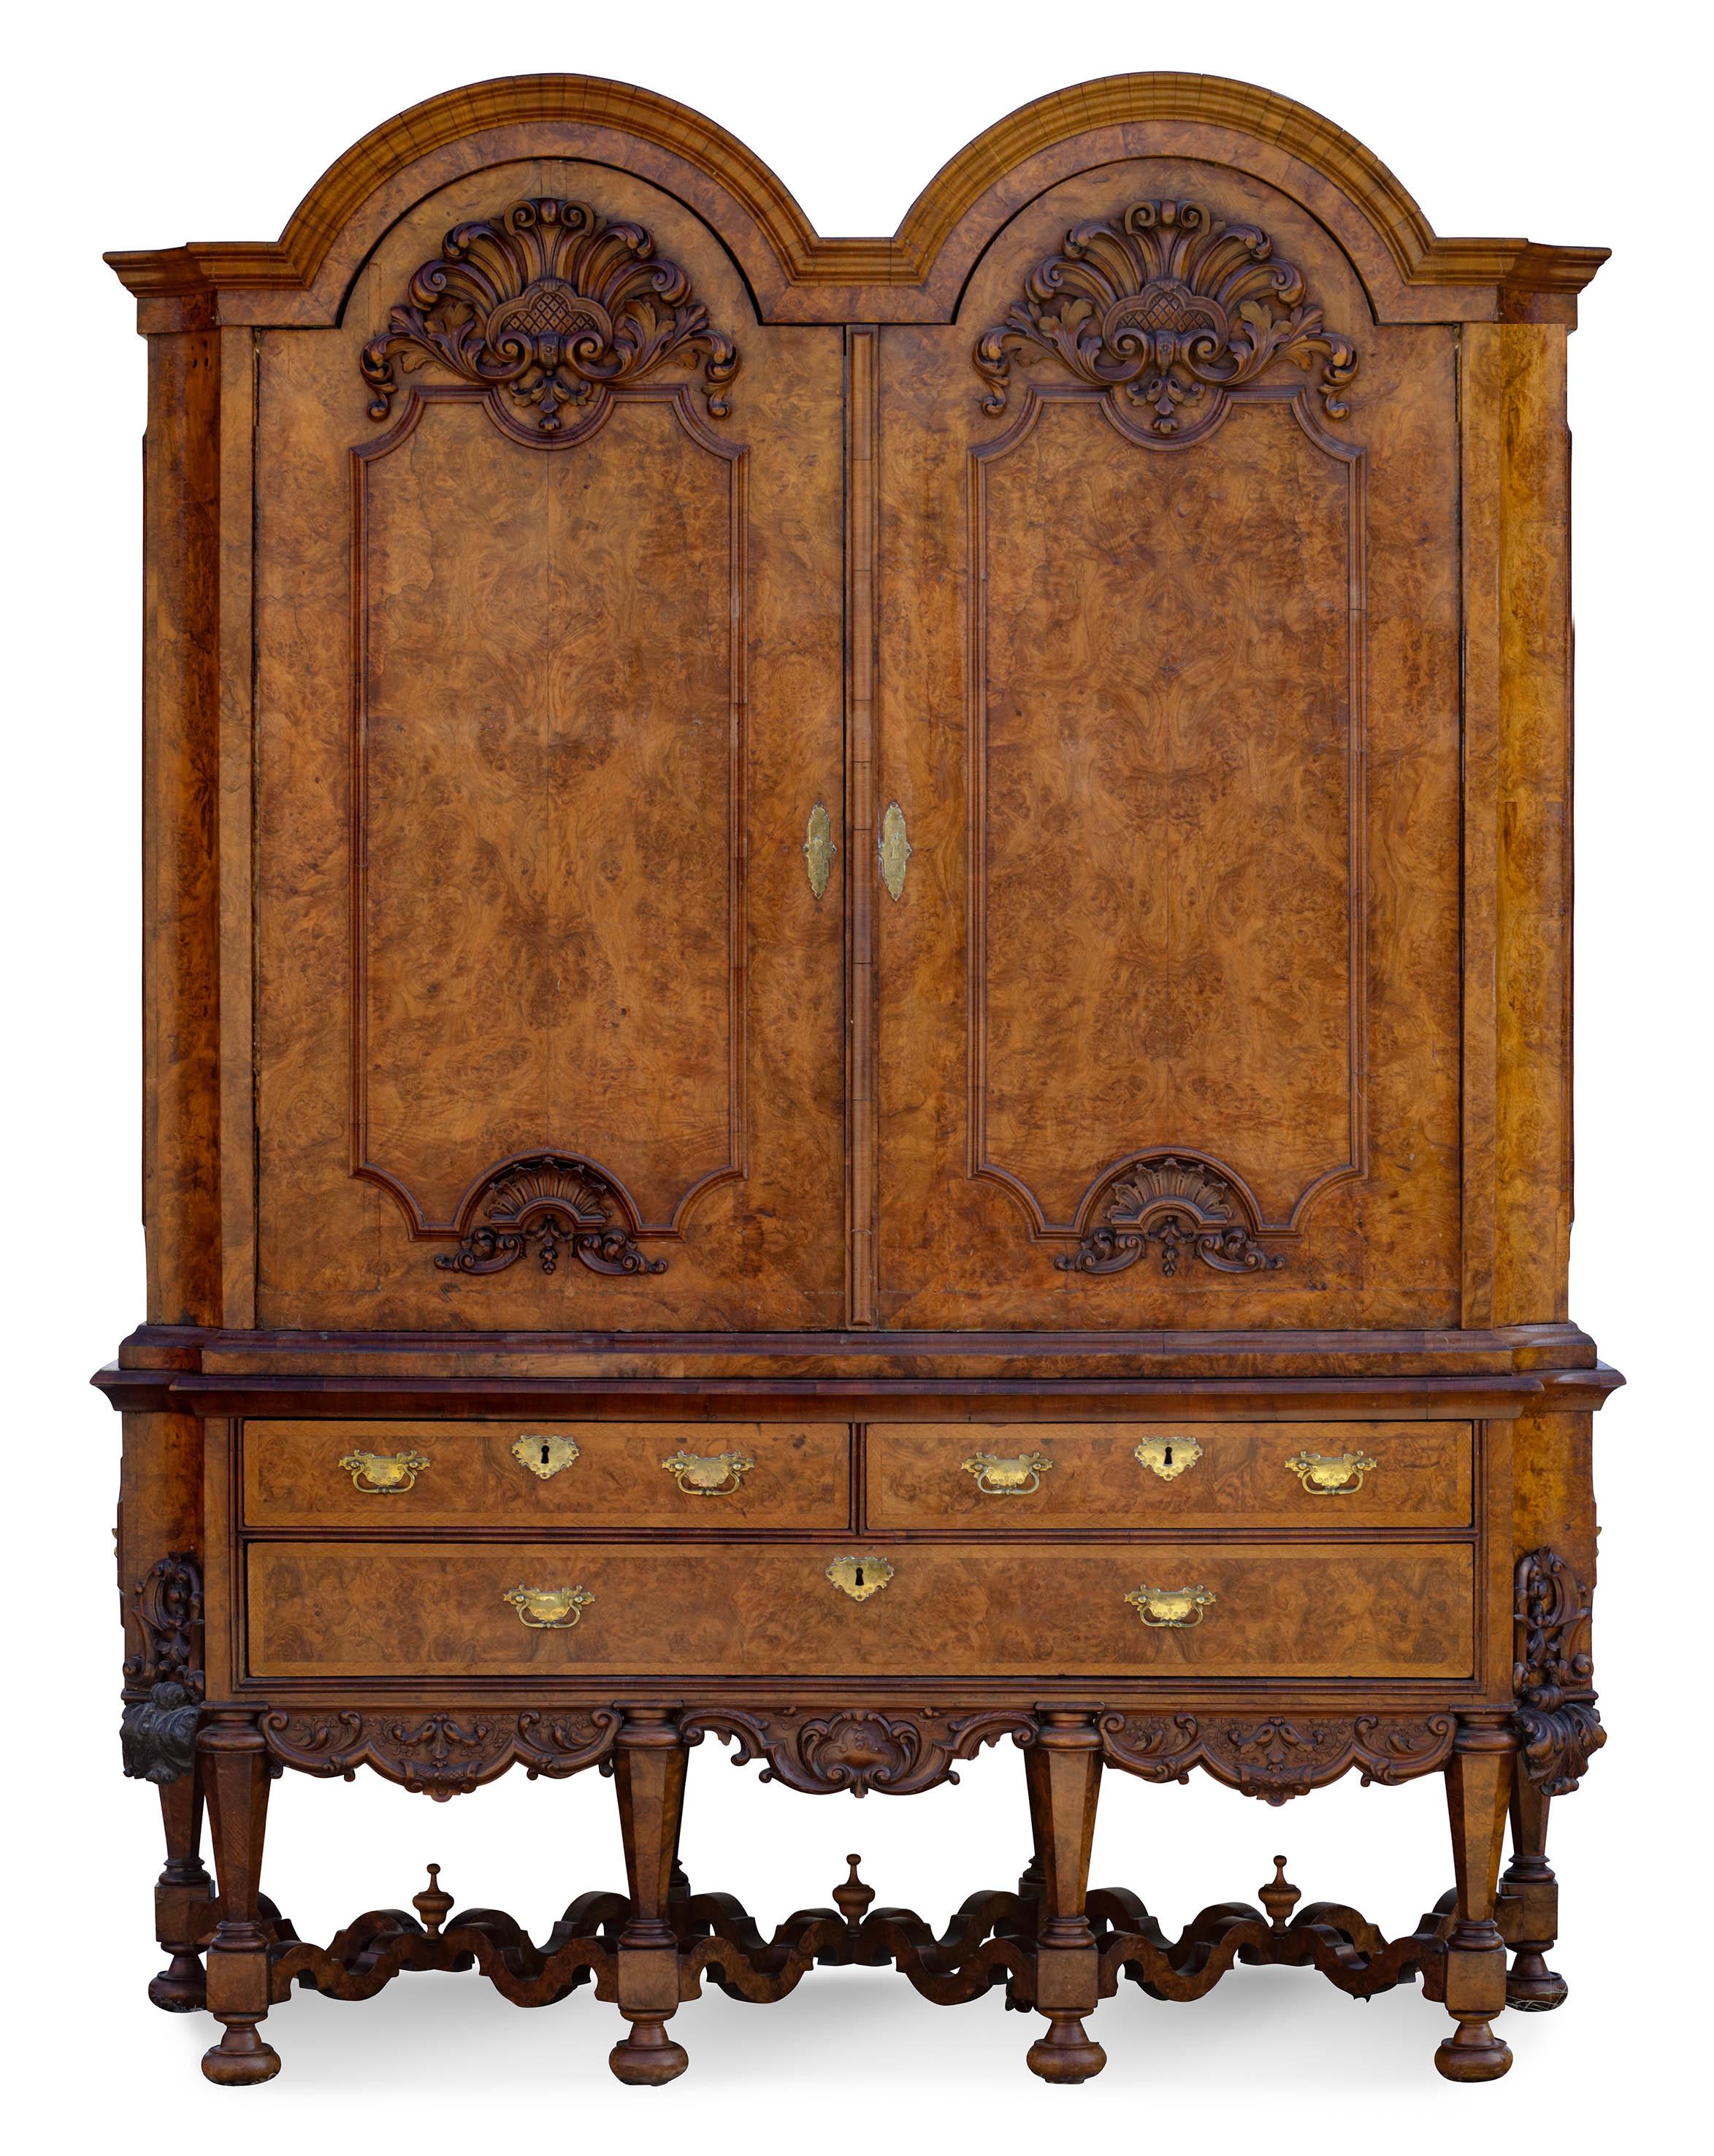 The Marot cabinet
A Magnificent Walnut Burr Cabinet on stand or 'kruisvoetkabinet' in the style of Daniel Marot
Circa 1720, probably made for George Clifford III in Amsterdam or the Hague

The cabinet is one of the rarest examples of a so-called